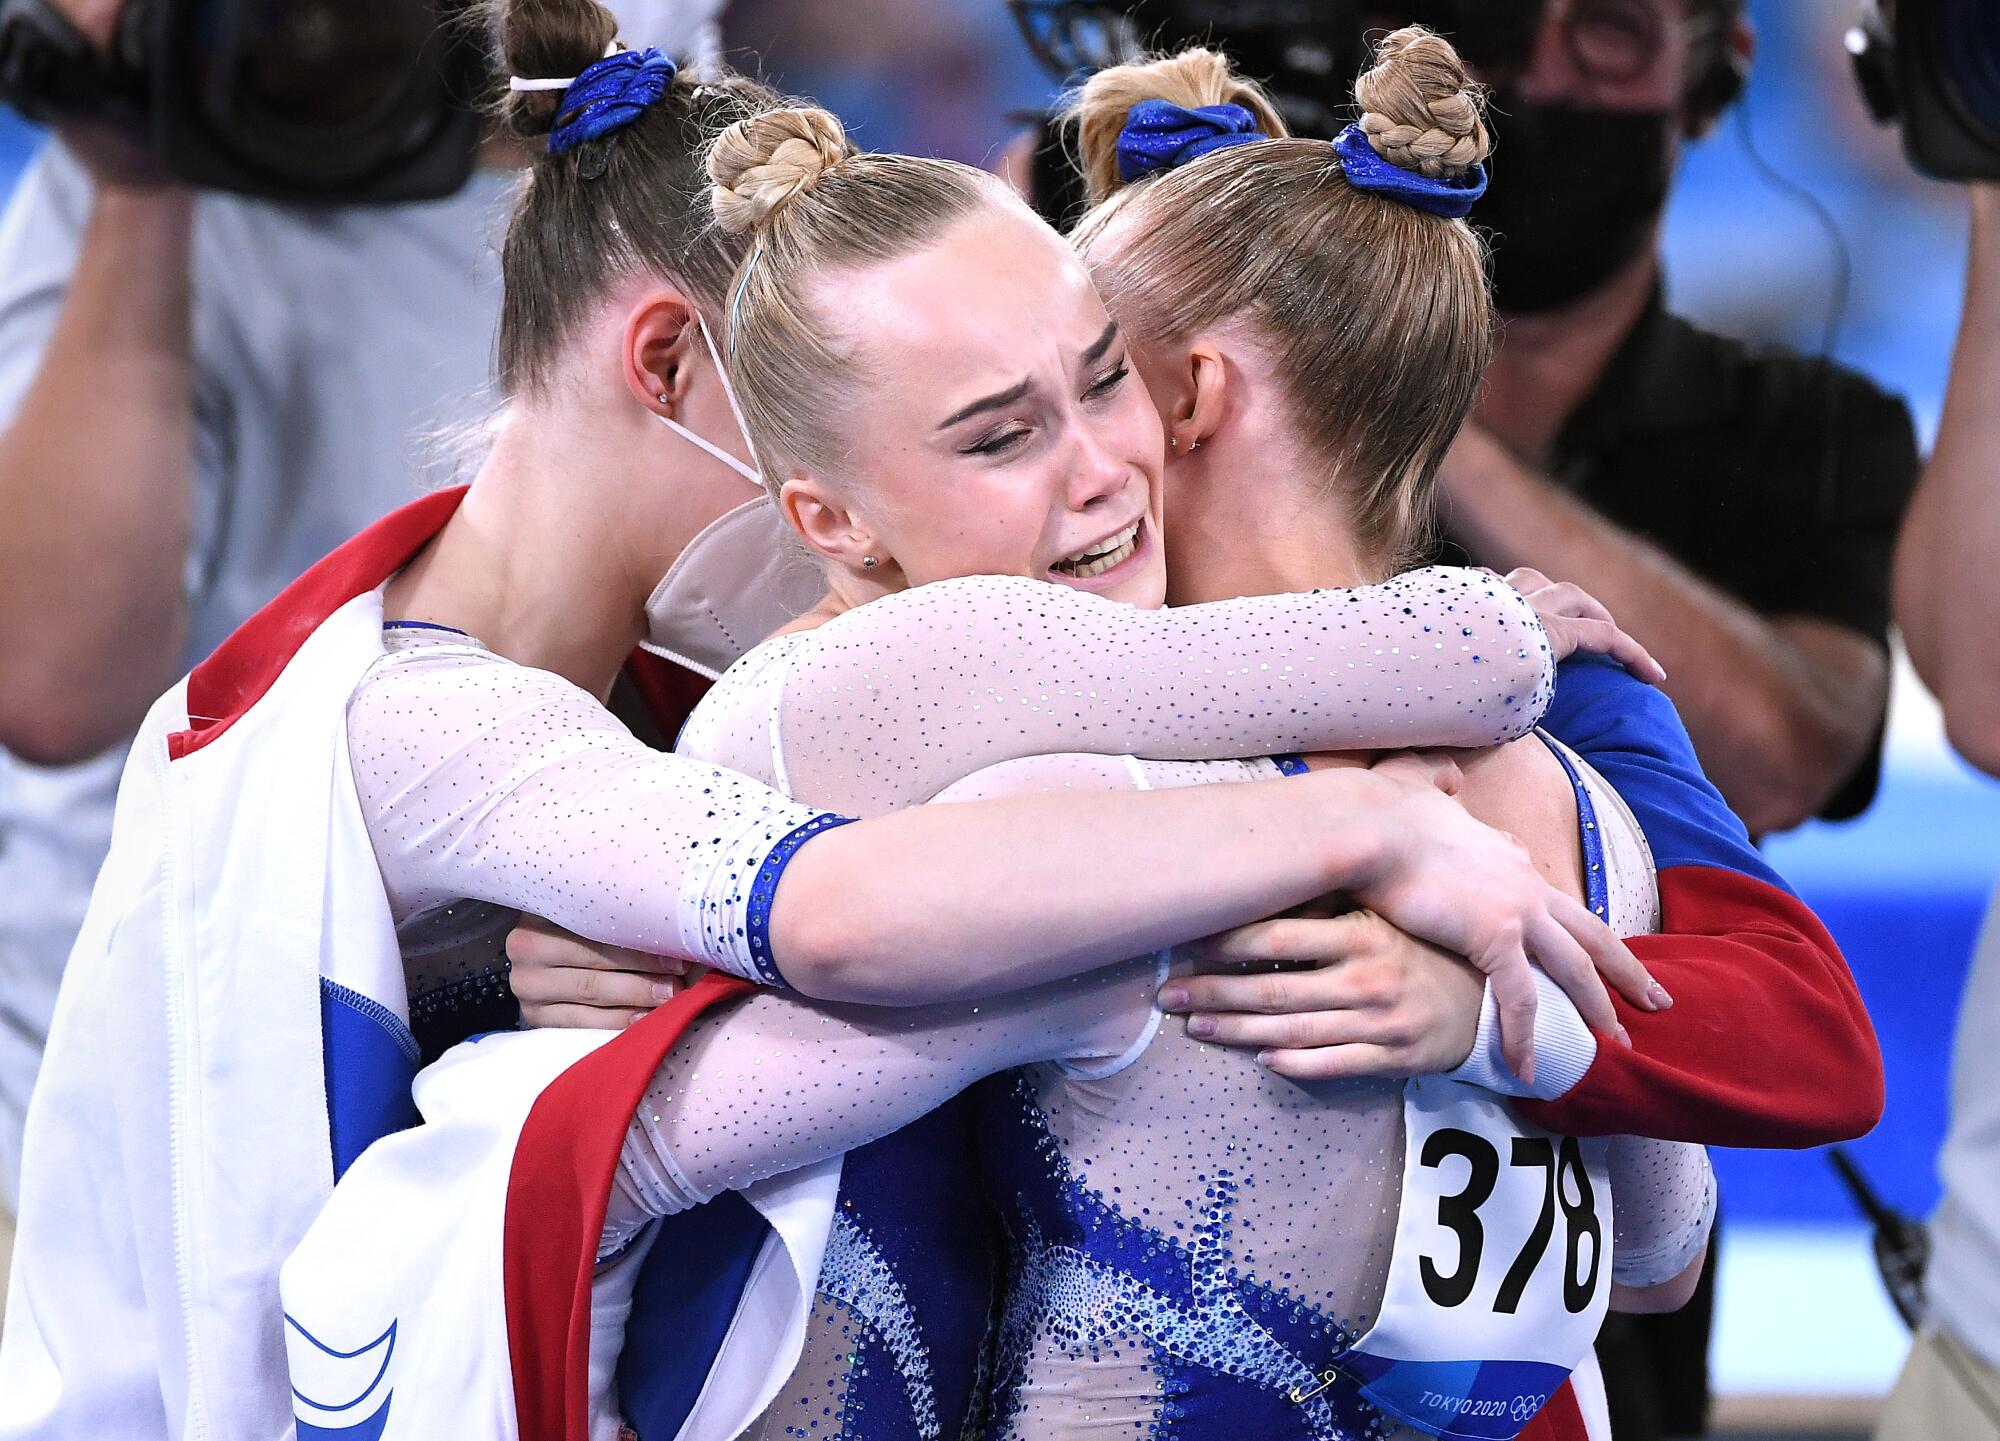 Members of the Russian team celebrate winning the gold medal in the women's gymnastics team final at the Tokyo Olympics.